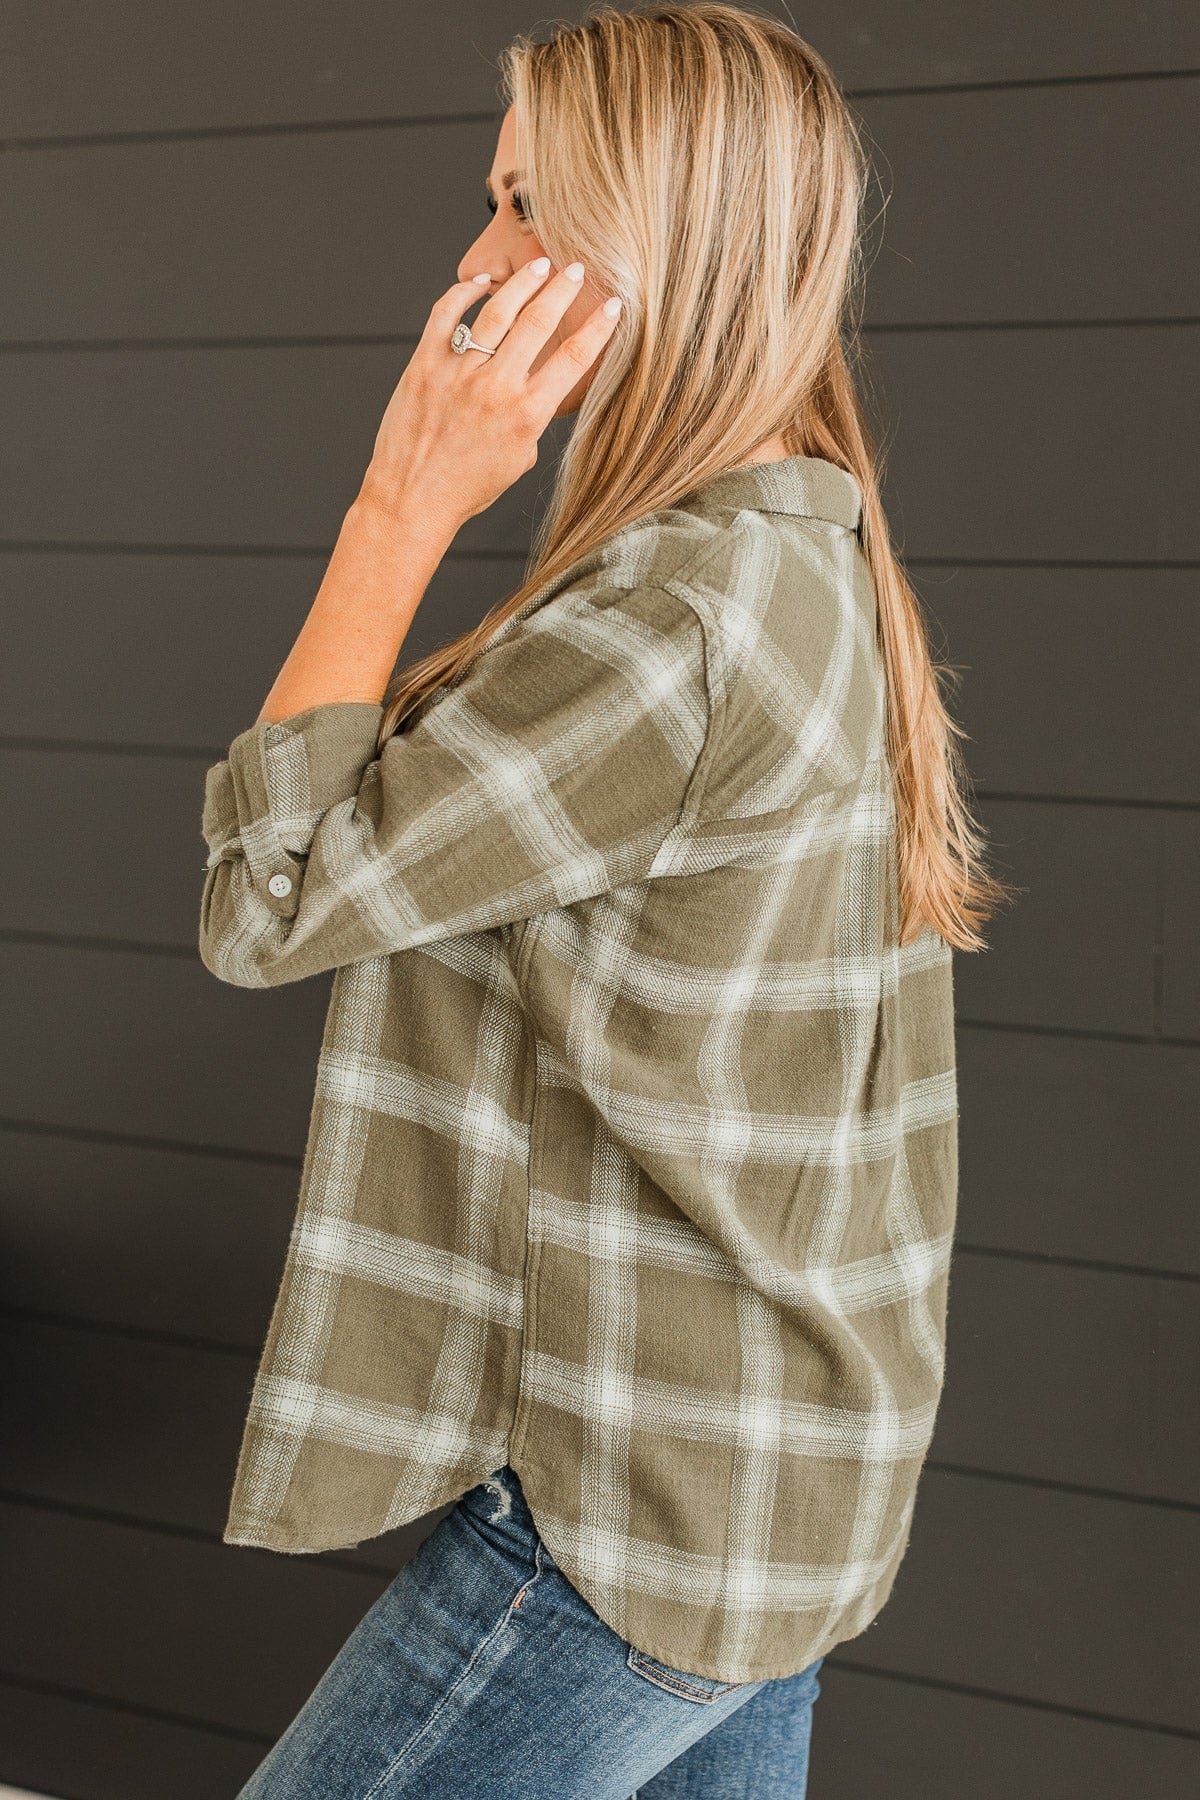 Thread & Supply Promises Made Plaid Top- Olive